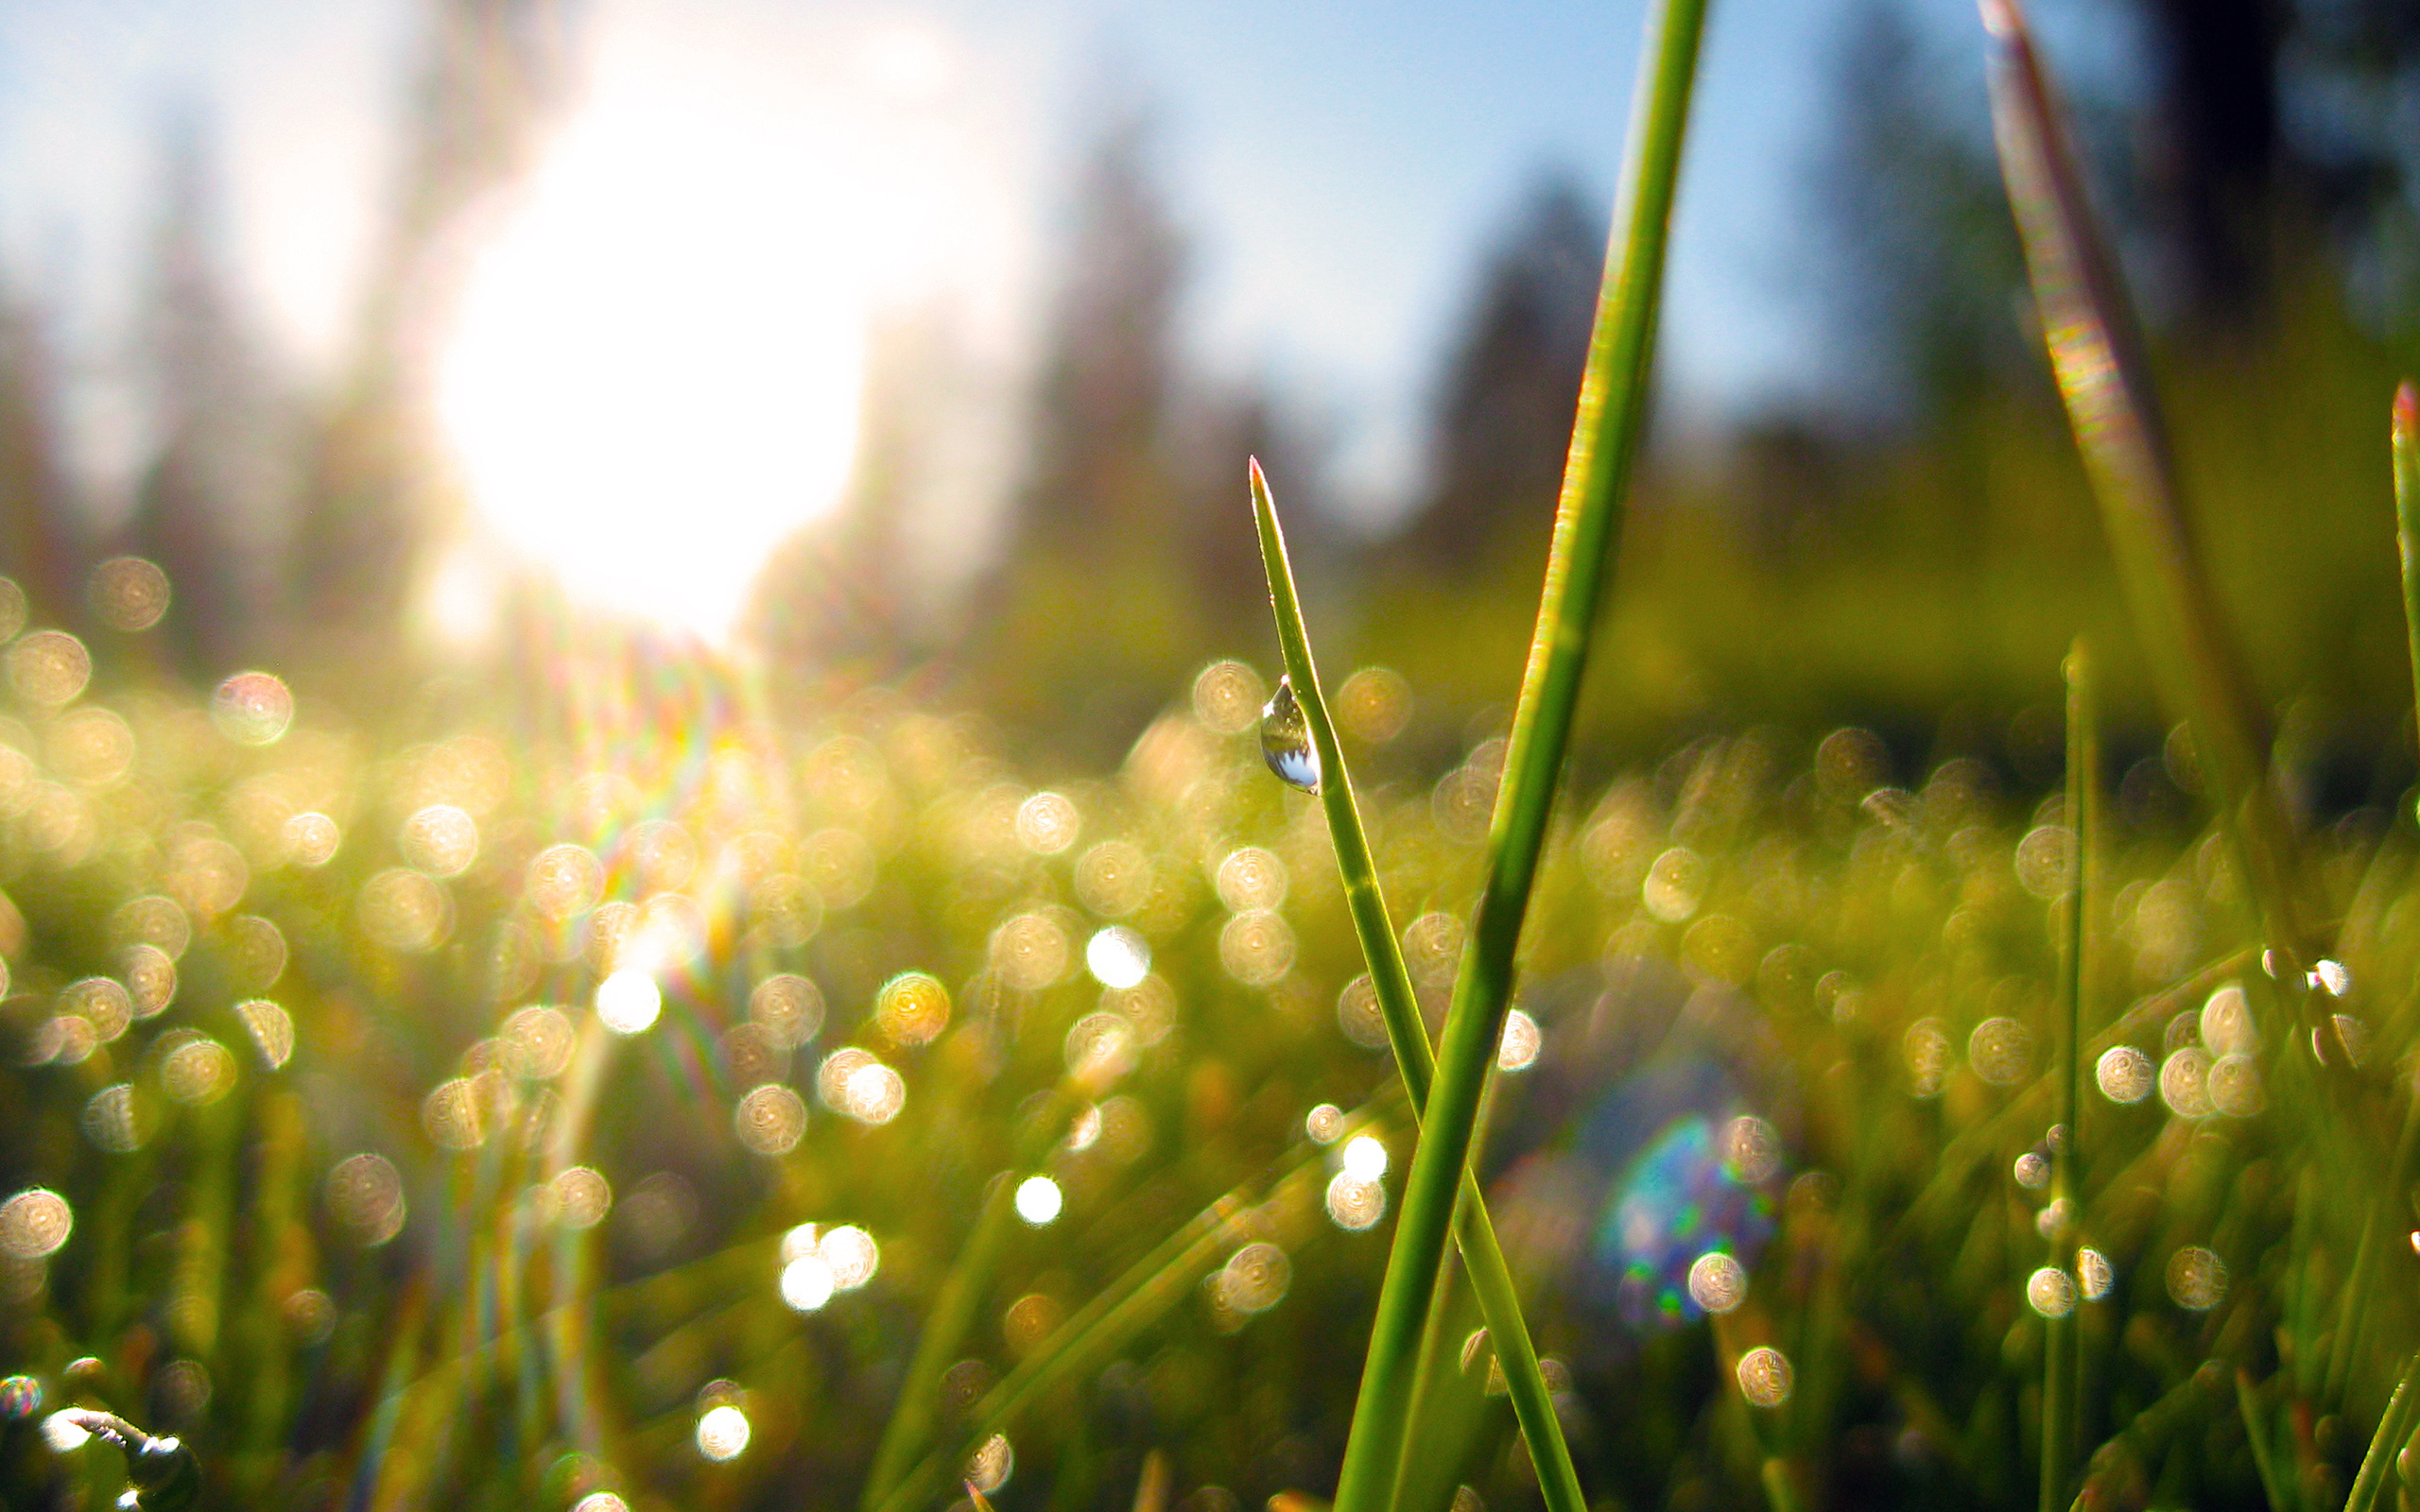 Bright spring grass wallpapers and images - wallpapers, pictures, photos